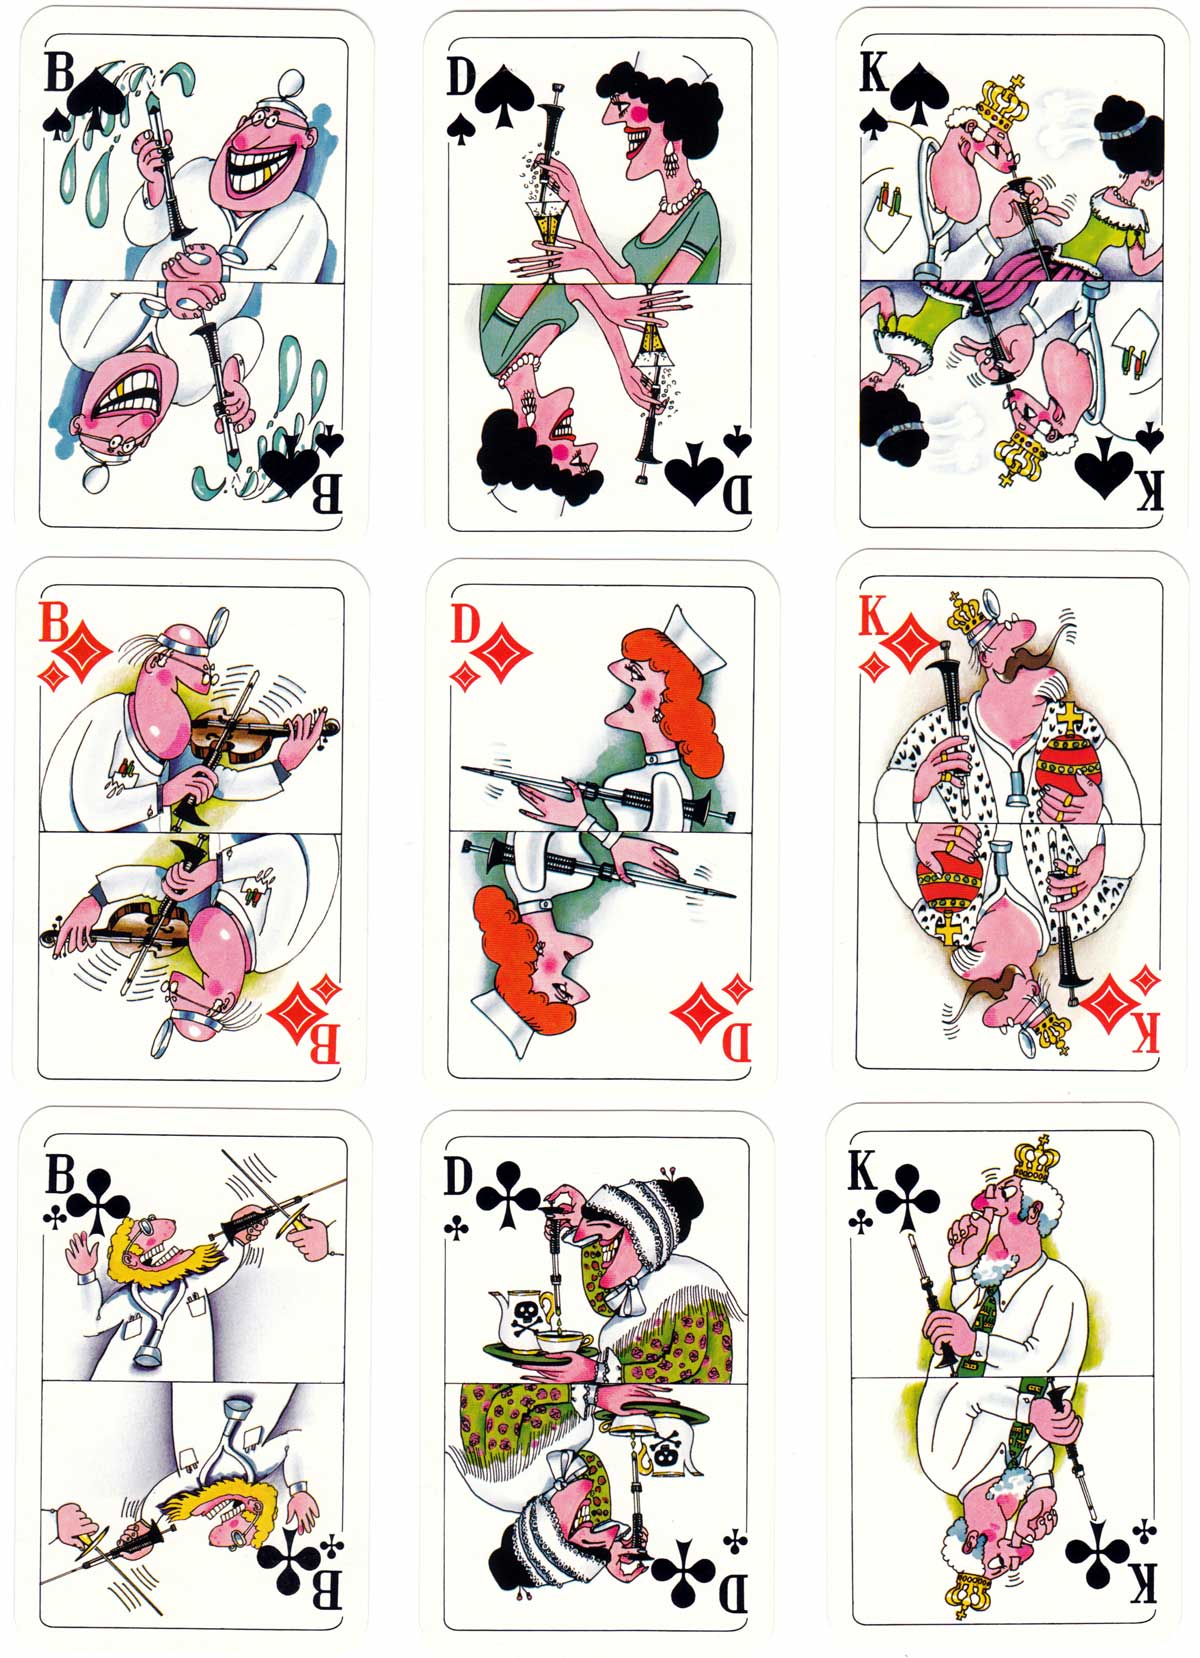 Capilettor health-related playing cards published by VASS, Leinfelden, 1978